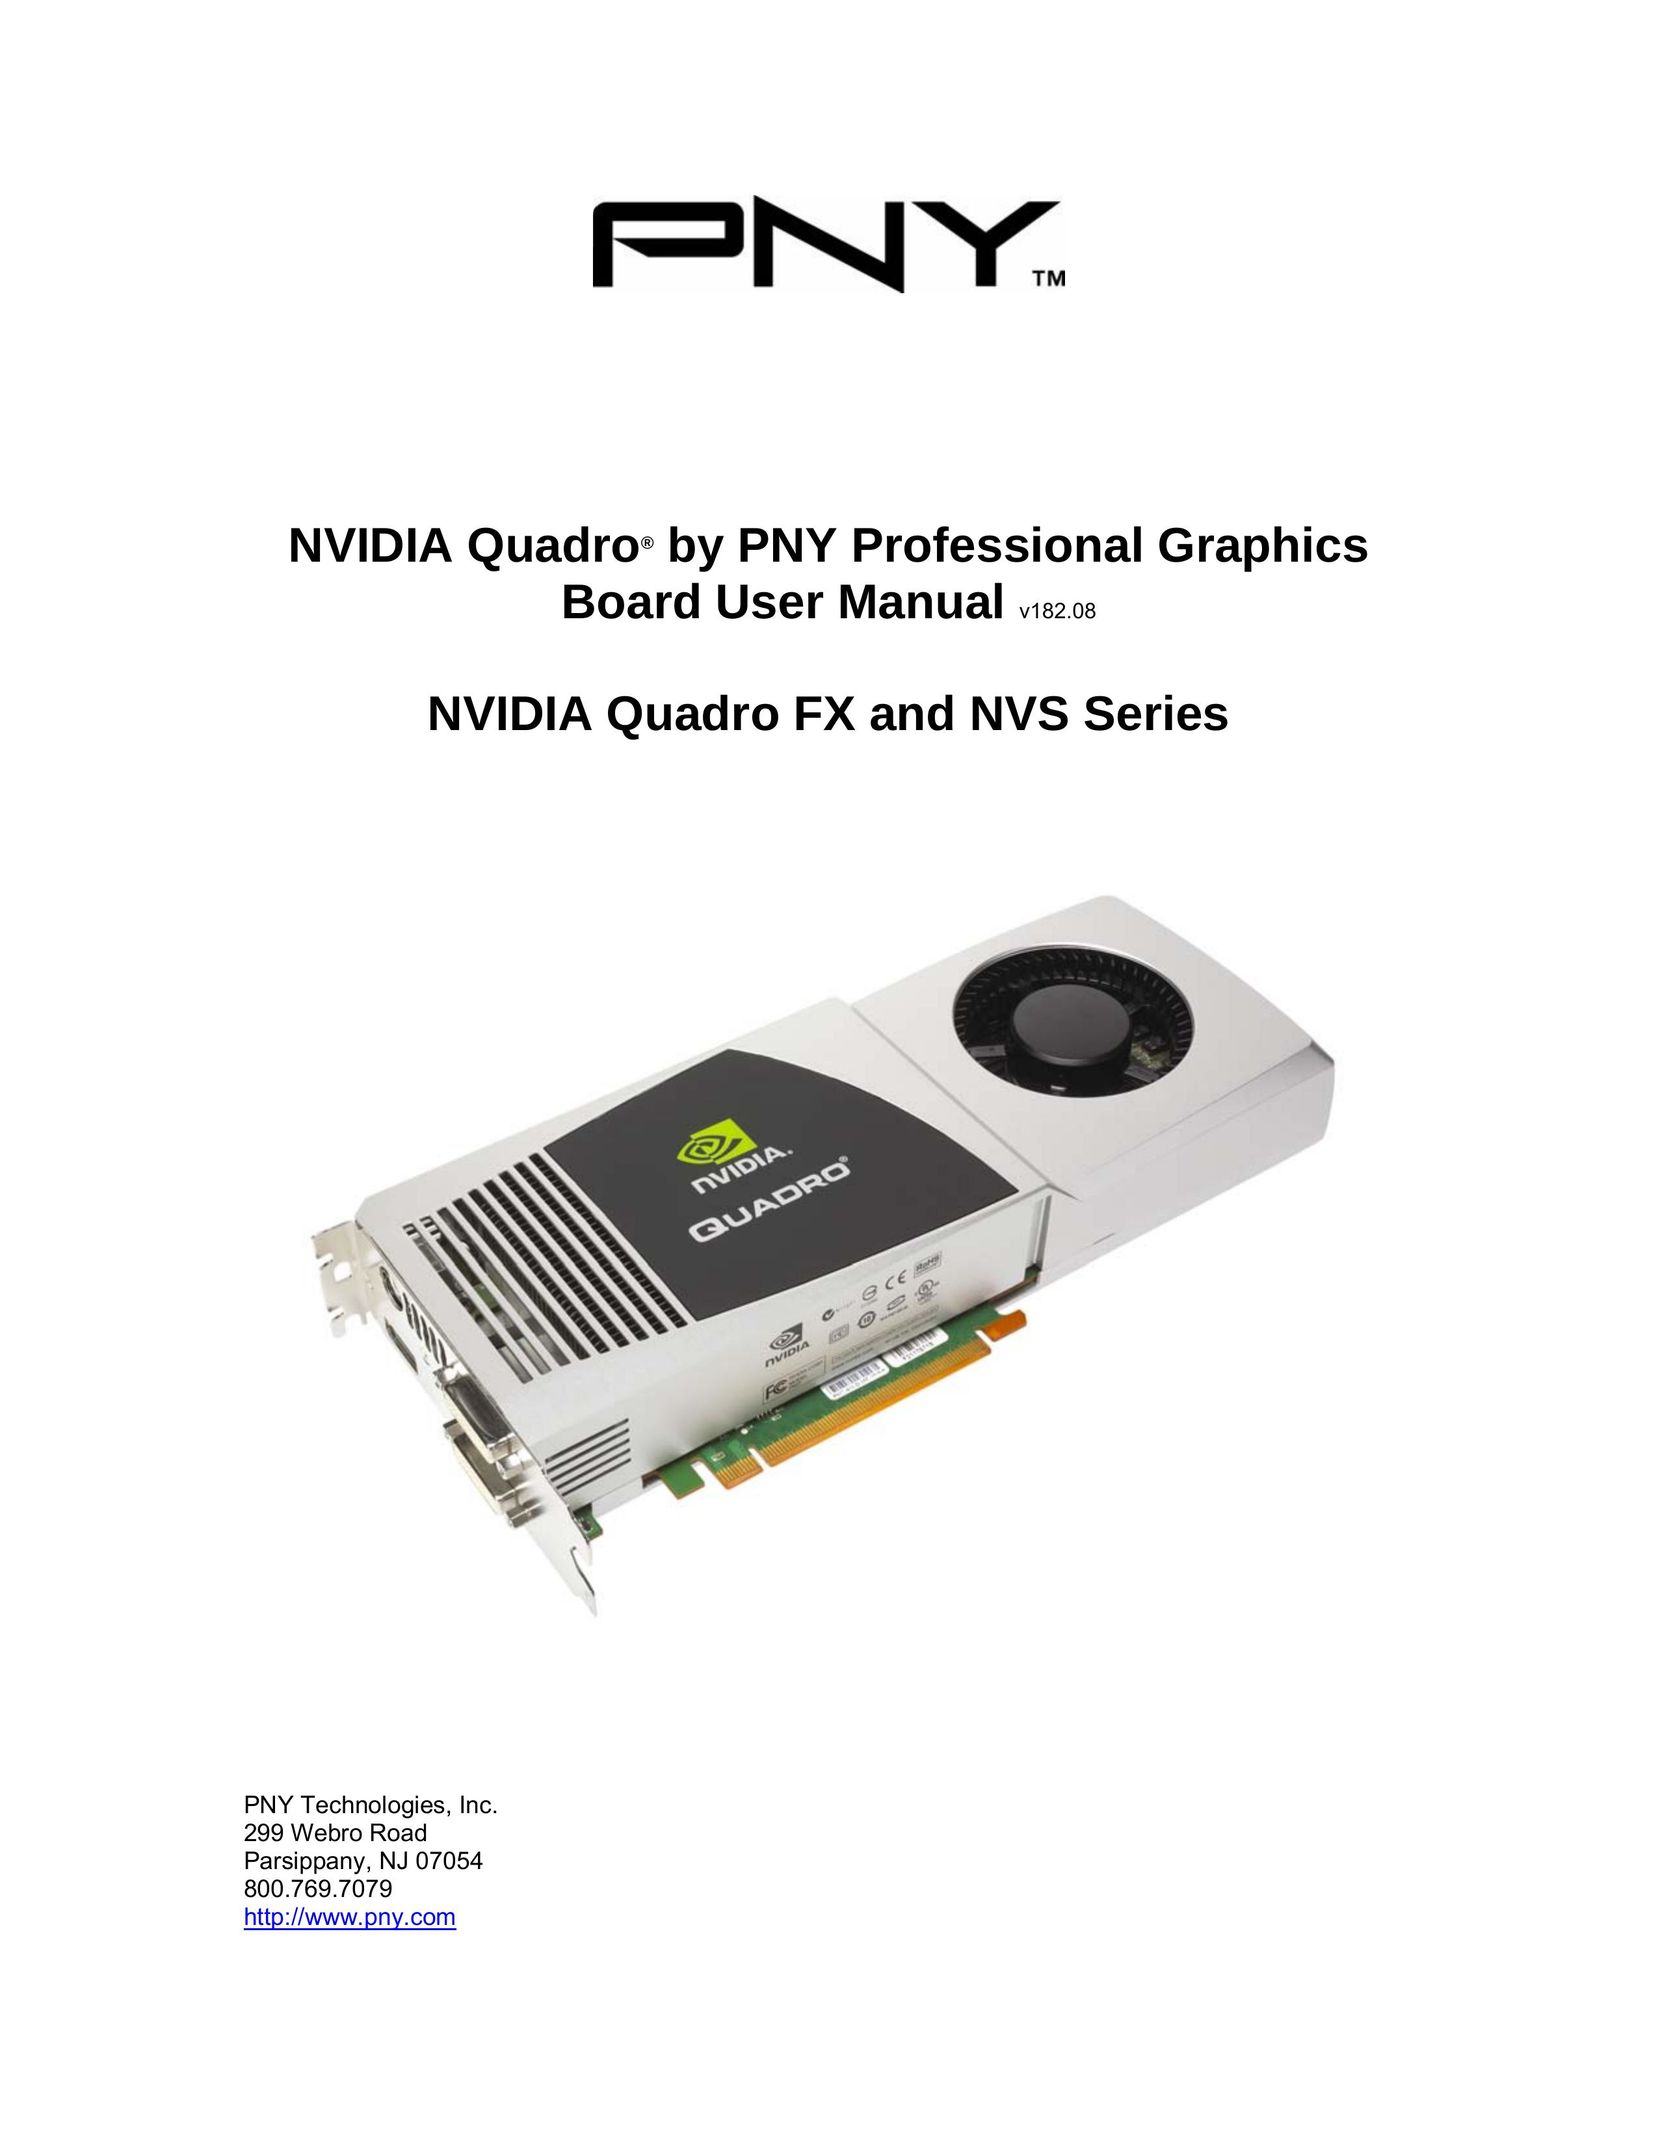 PNY FX 370 Computer Hardware User Manual